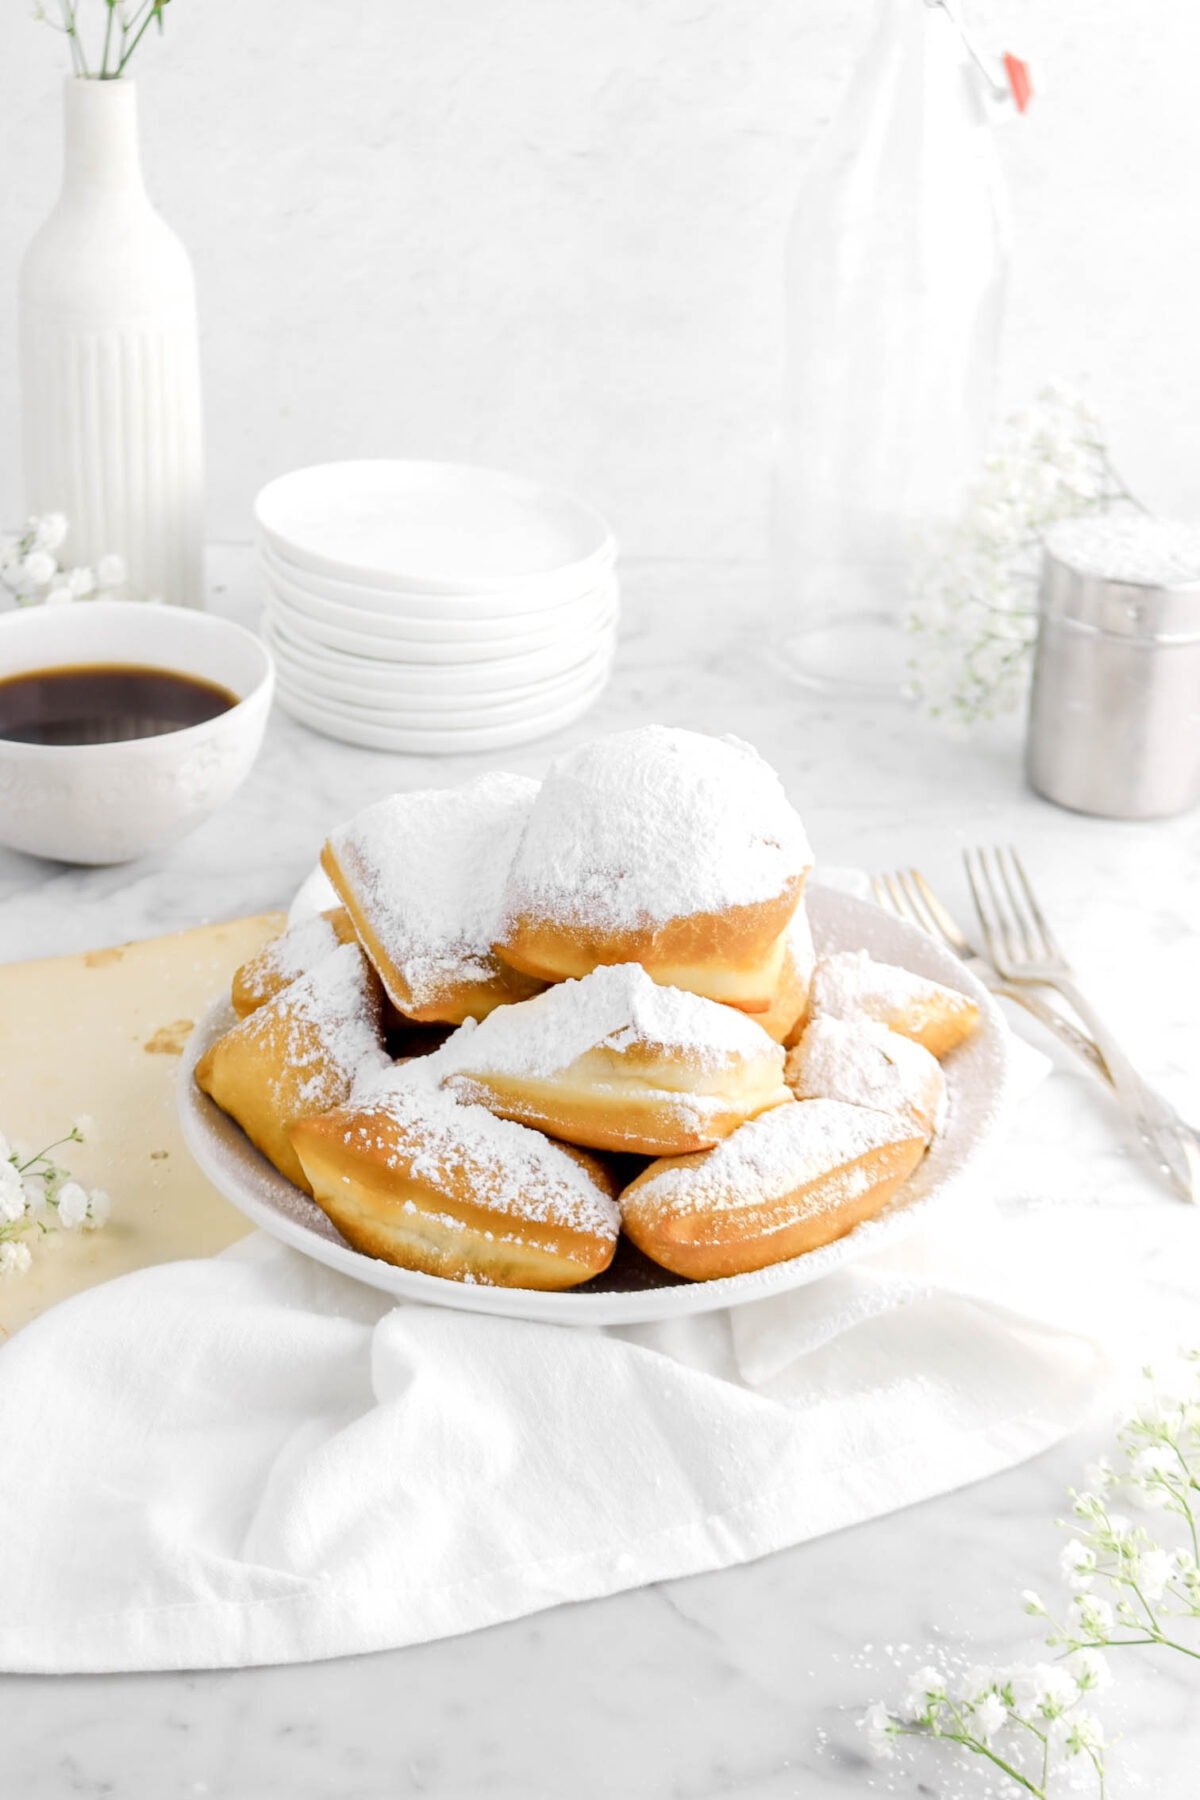 angled photo of beignets in white bowl withs tack f plates, flowers, cup of coffee, forks, and white napkin